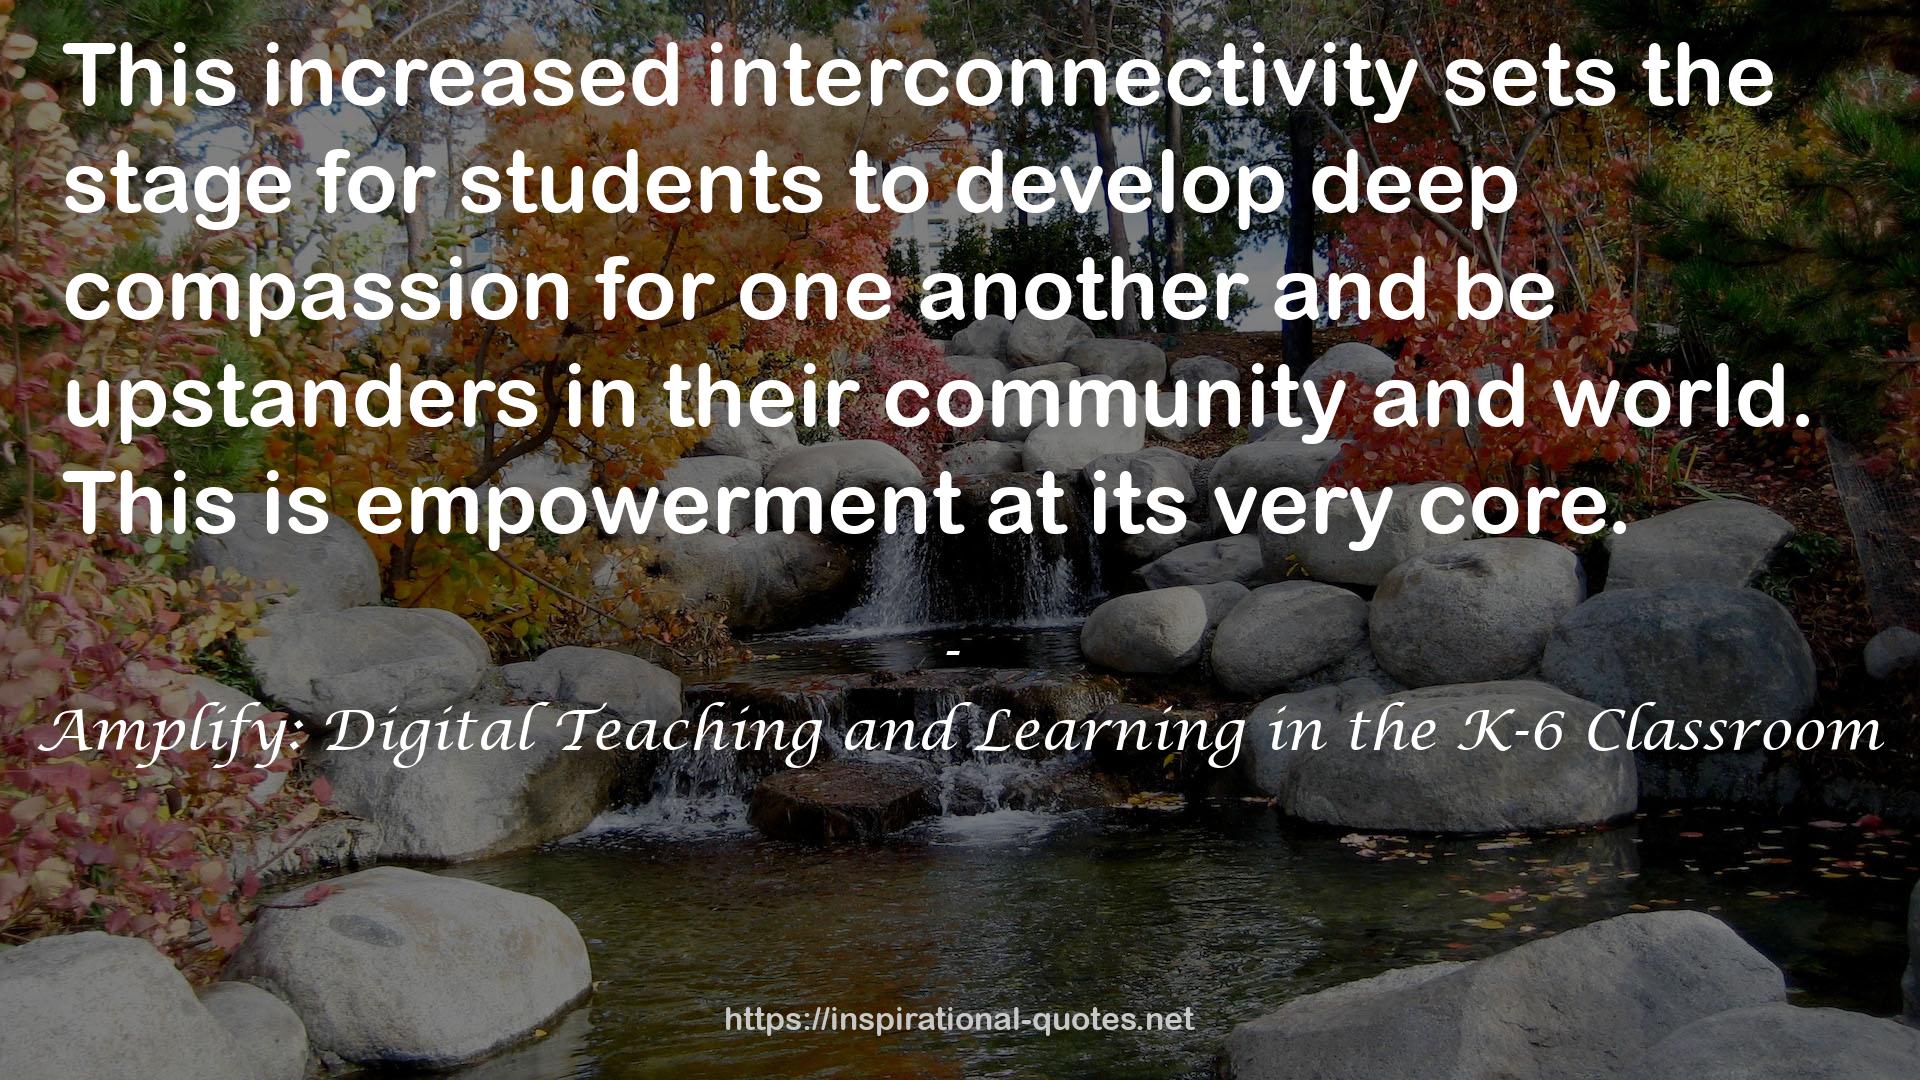 Amplify: Digital Teaching and Learning in the K-6 Classroom QUOTES